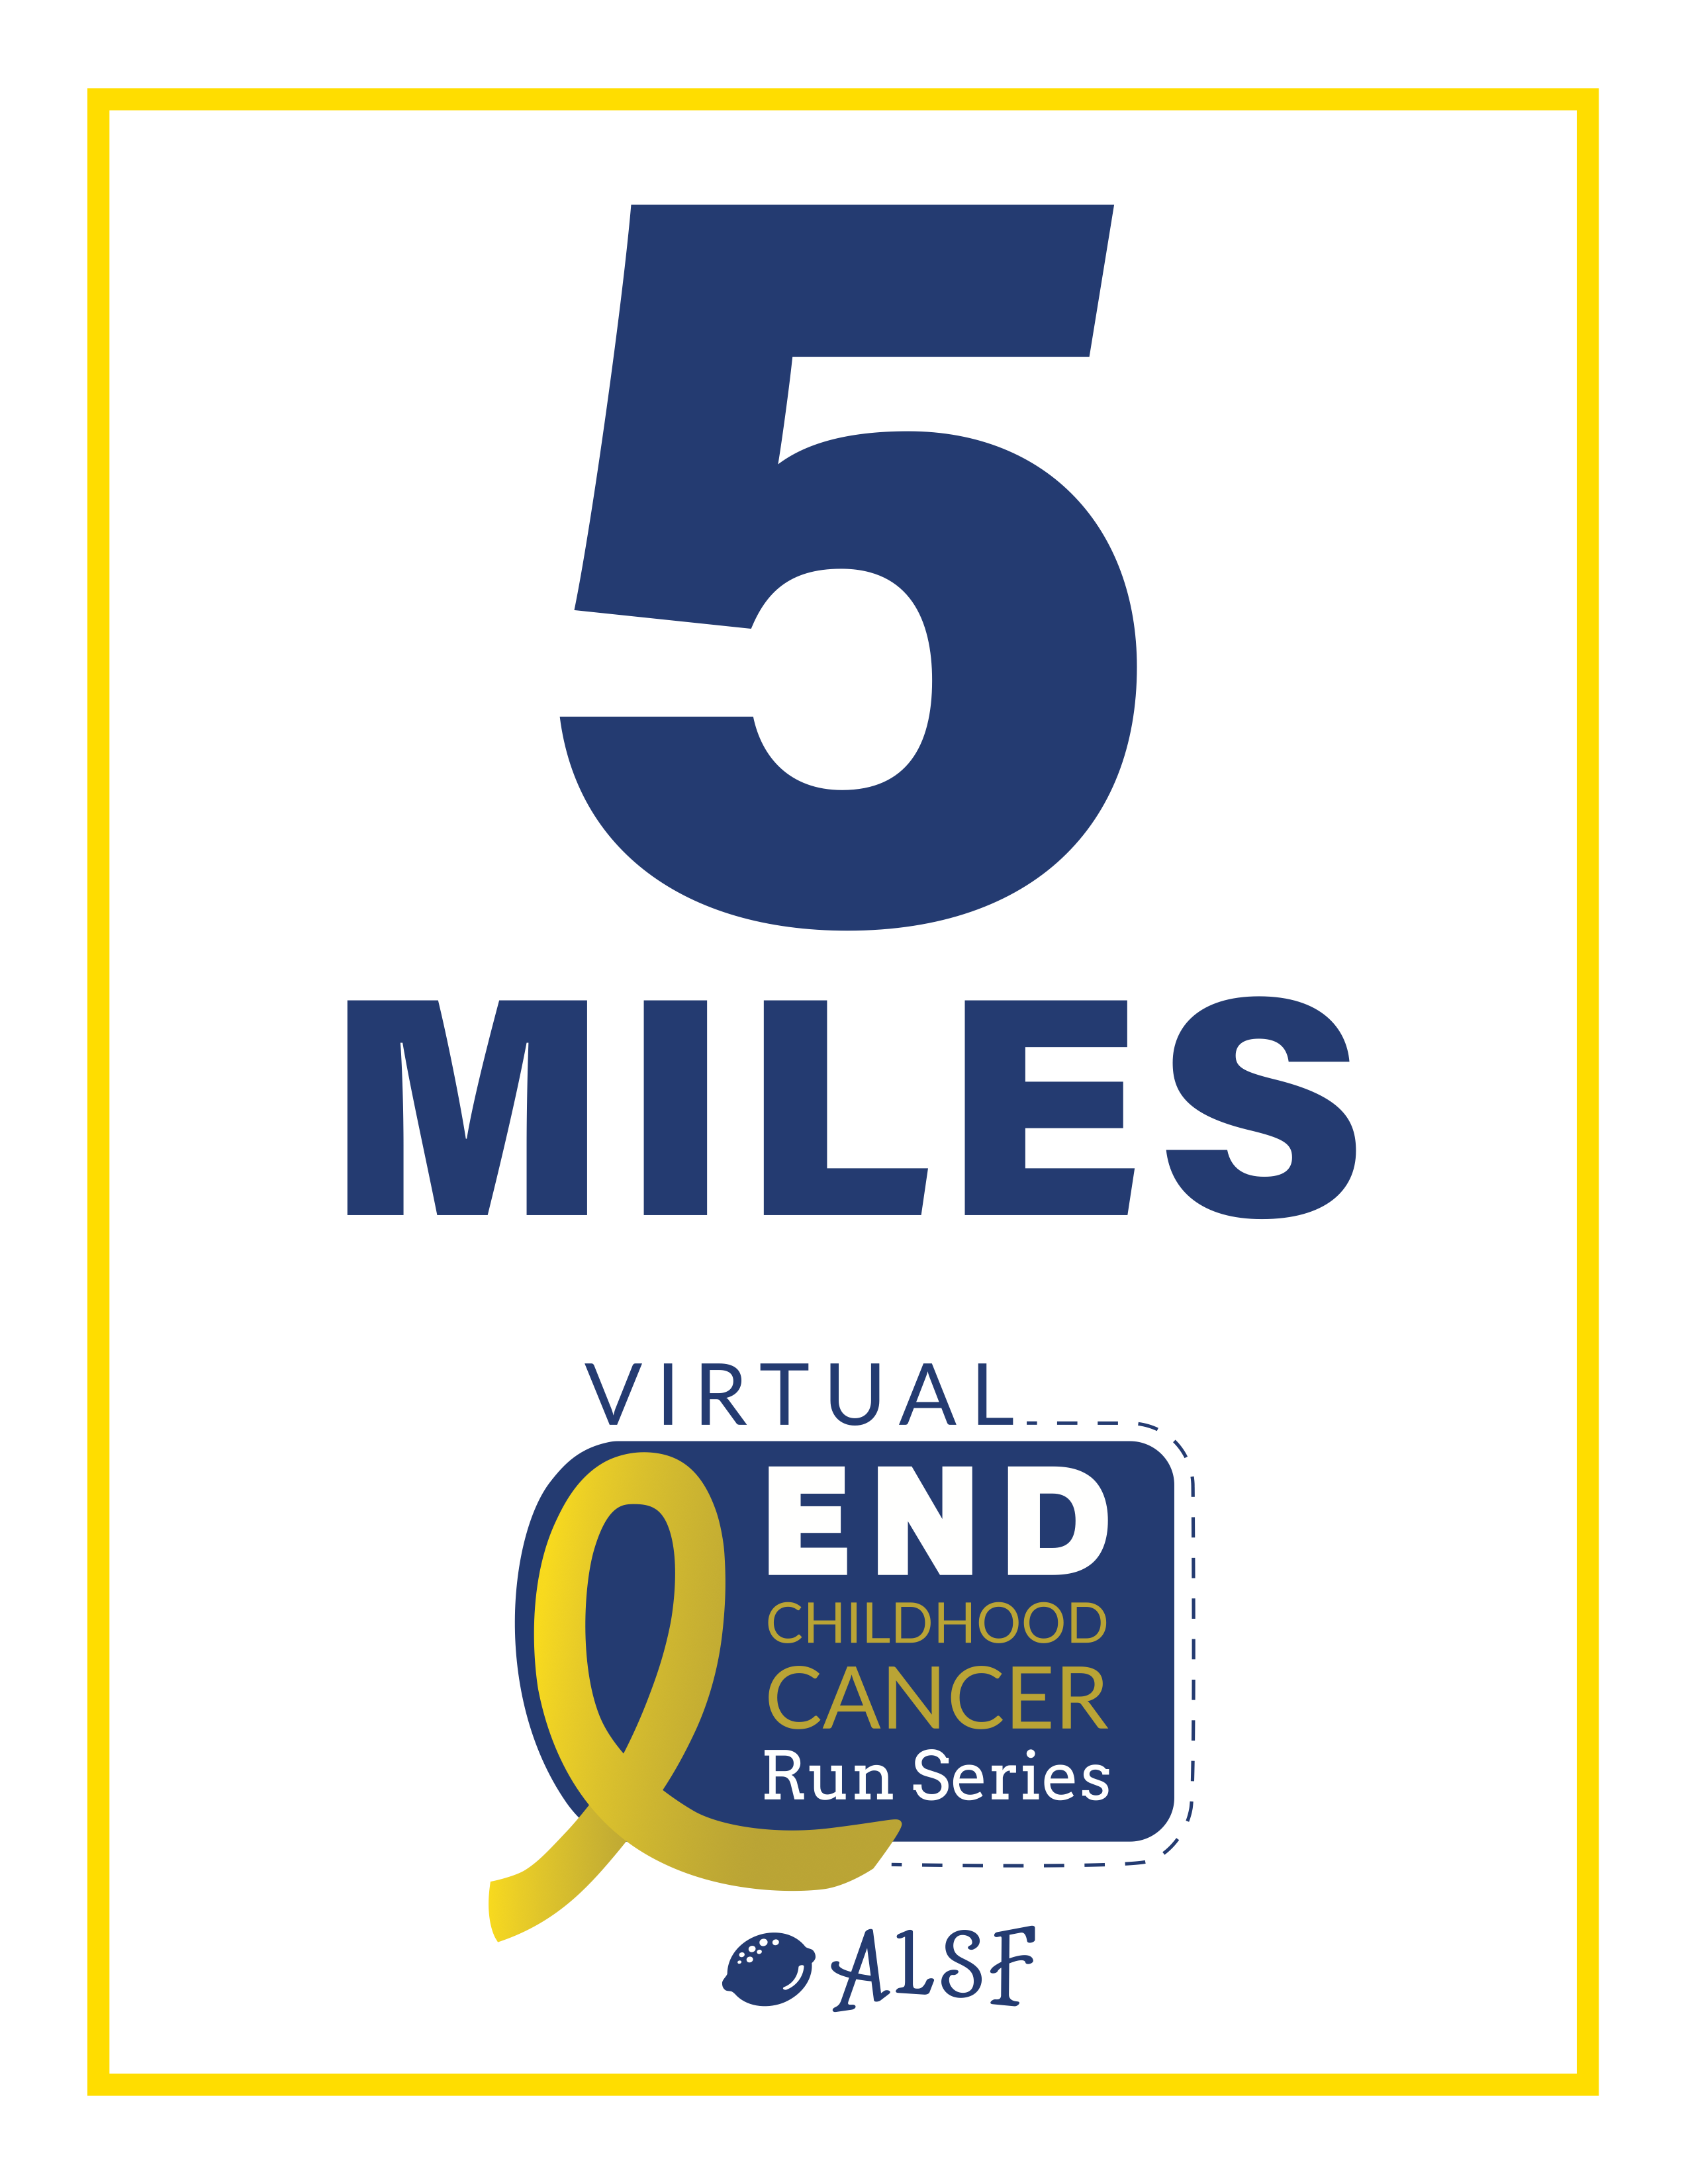 Virtual End Childhood Cancer Run Series Mile Marker - 5 Miles